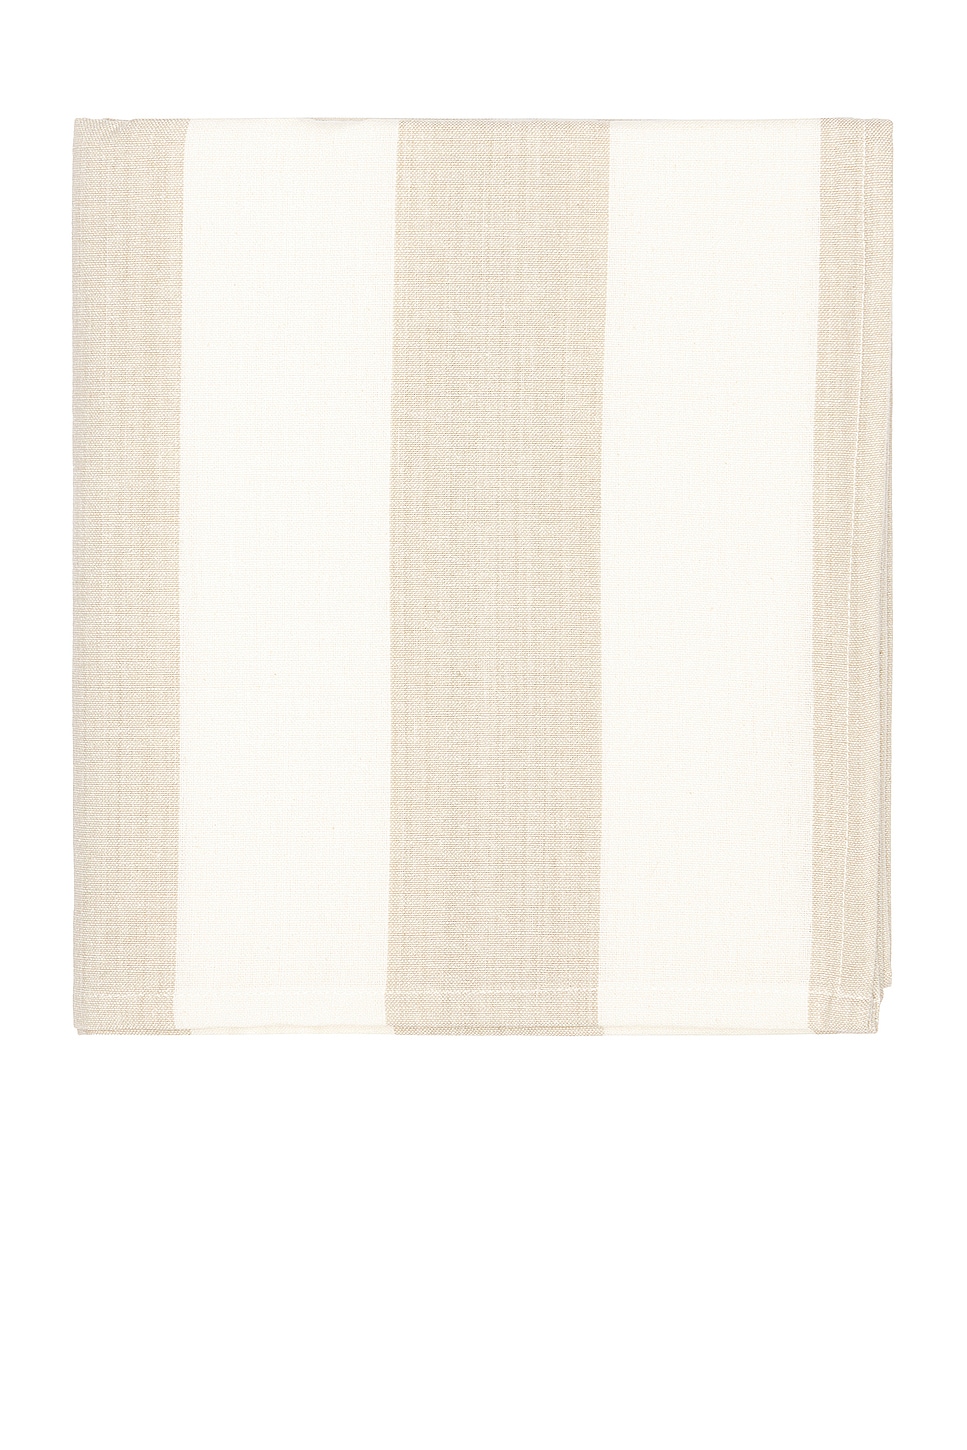 Image 1 of HAWKINS NEW YORK Essential Striped Tablecloth in Ivory & Flax